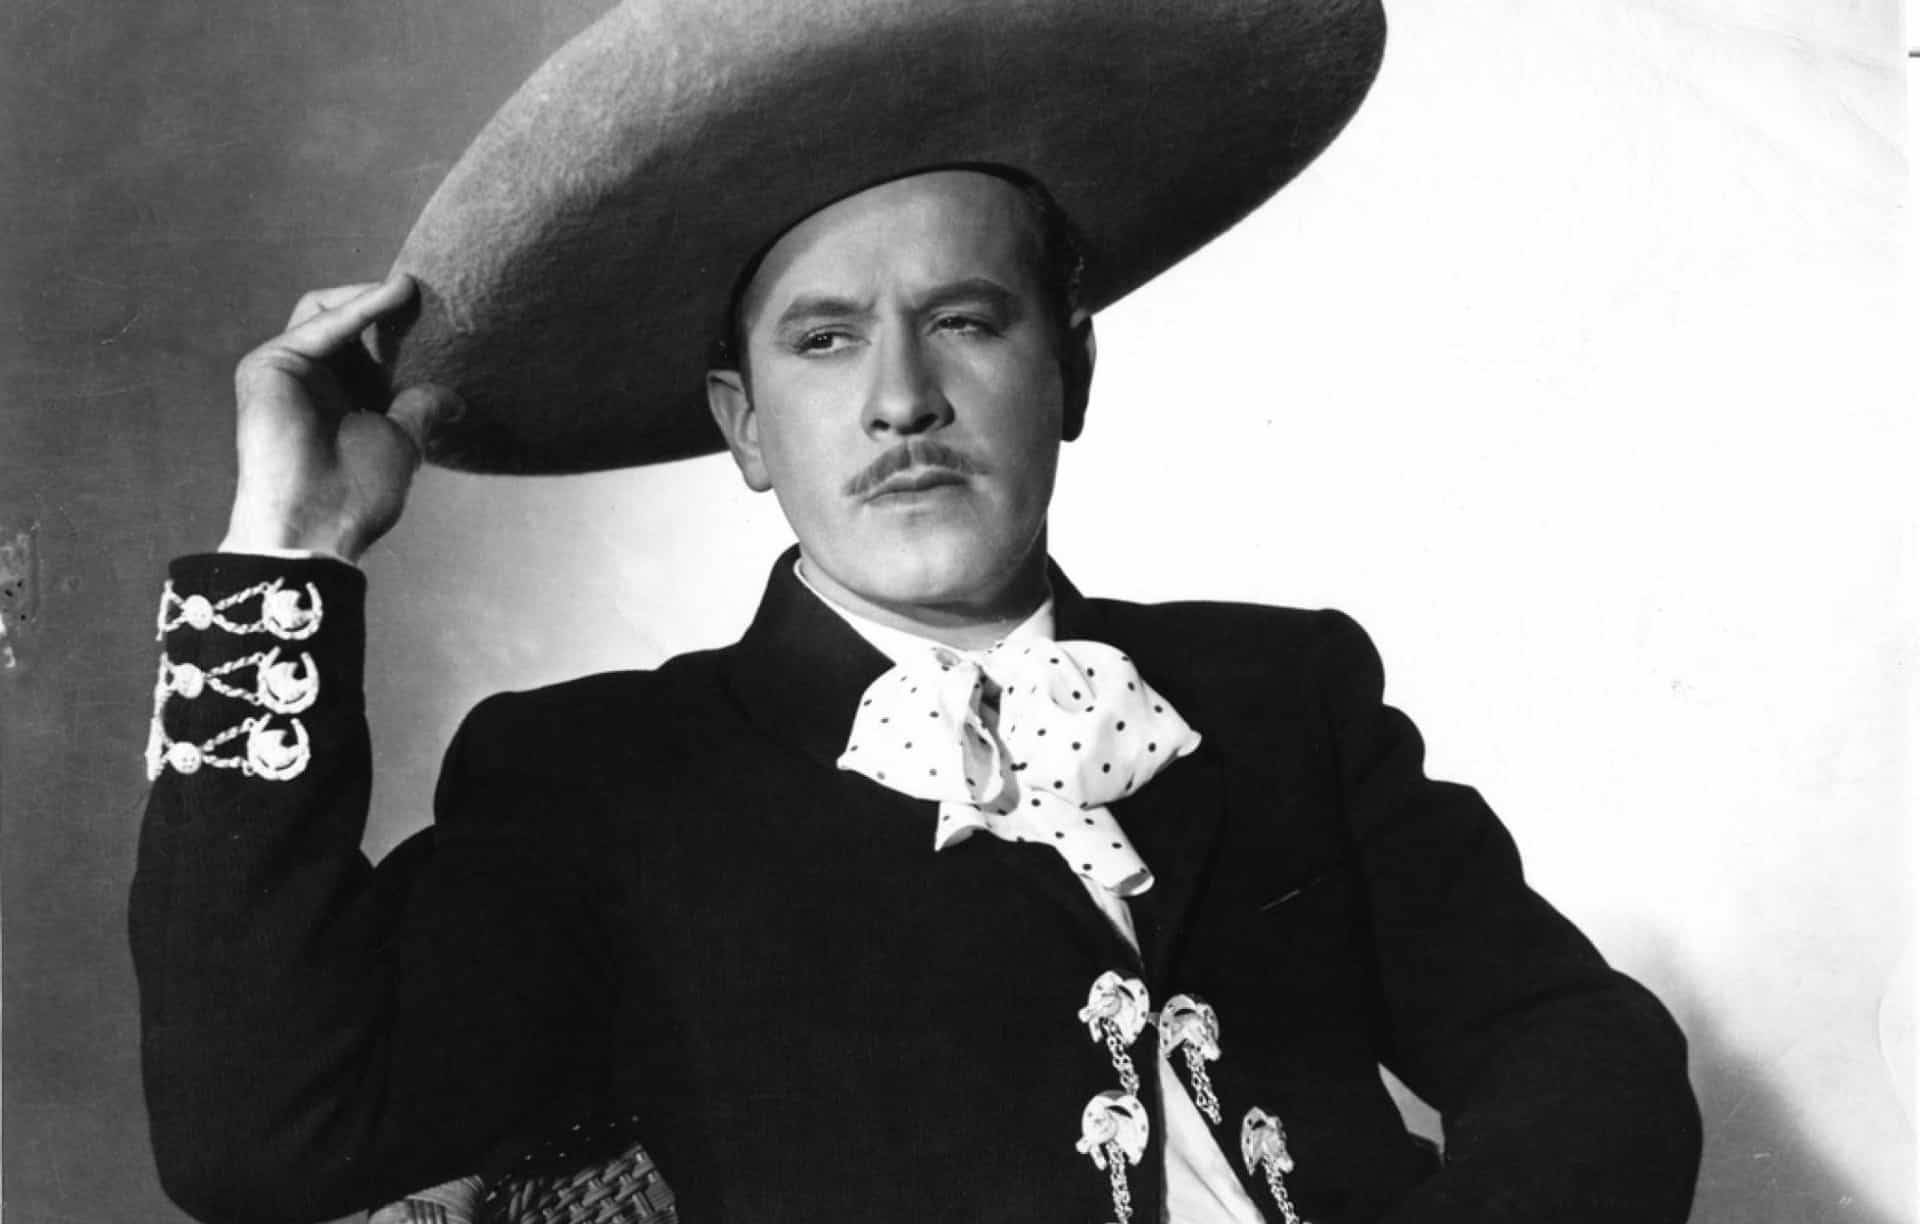 The singer and actor Pedro Infante.